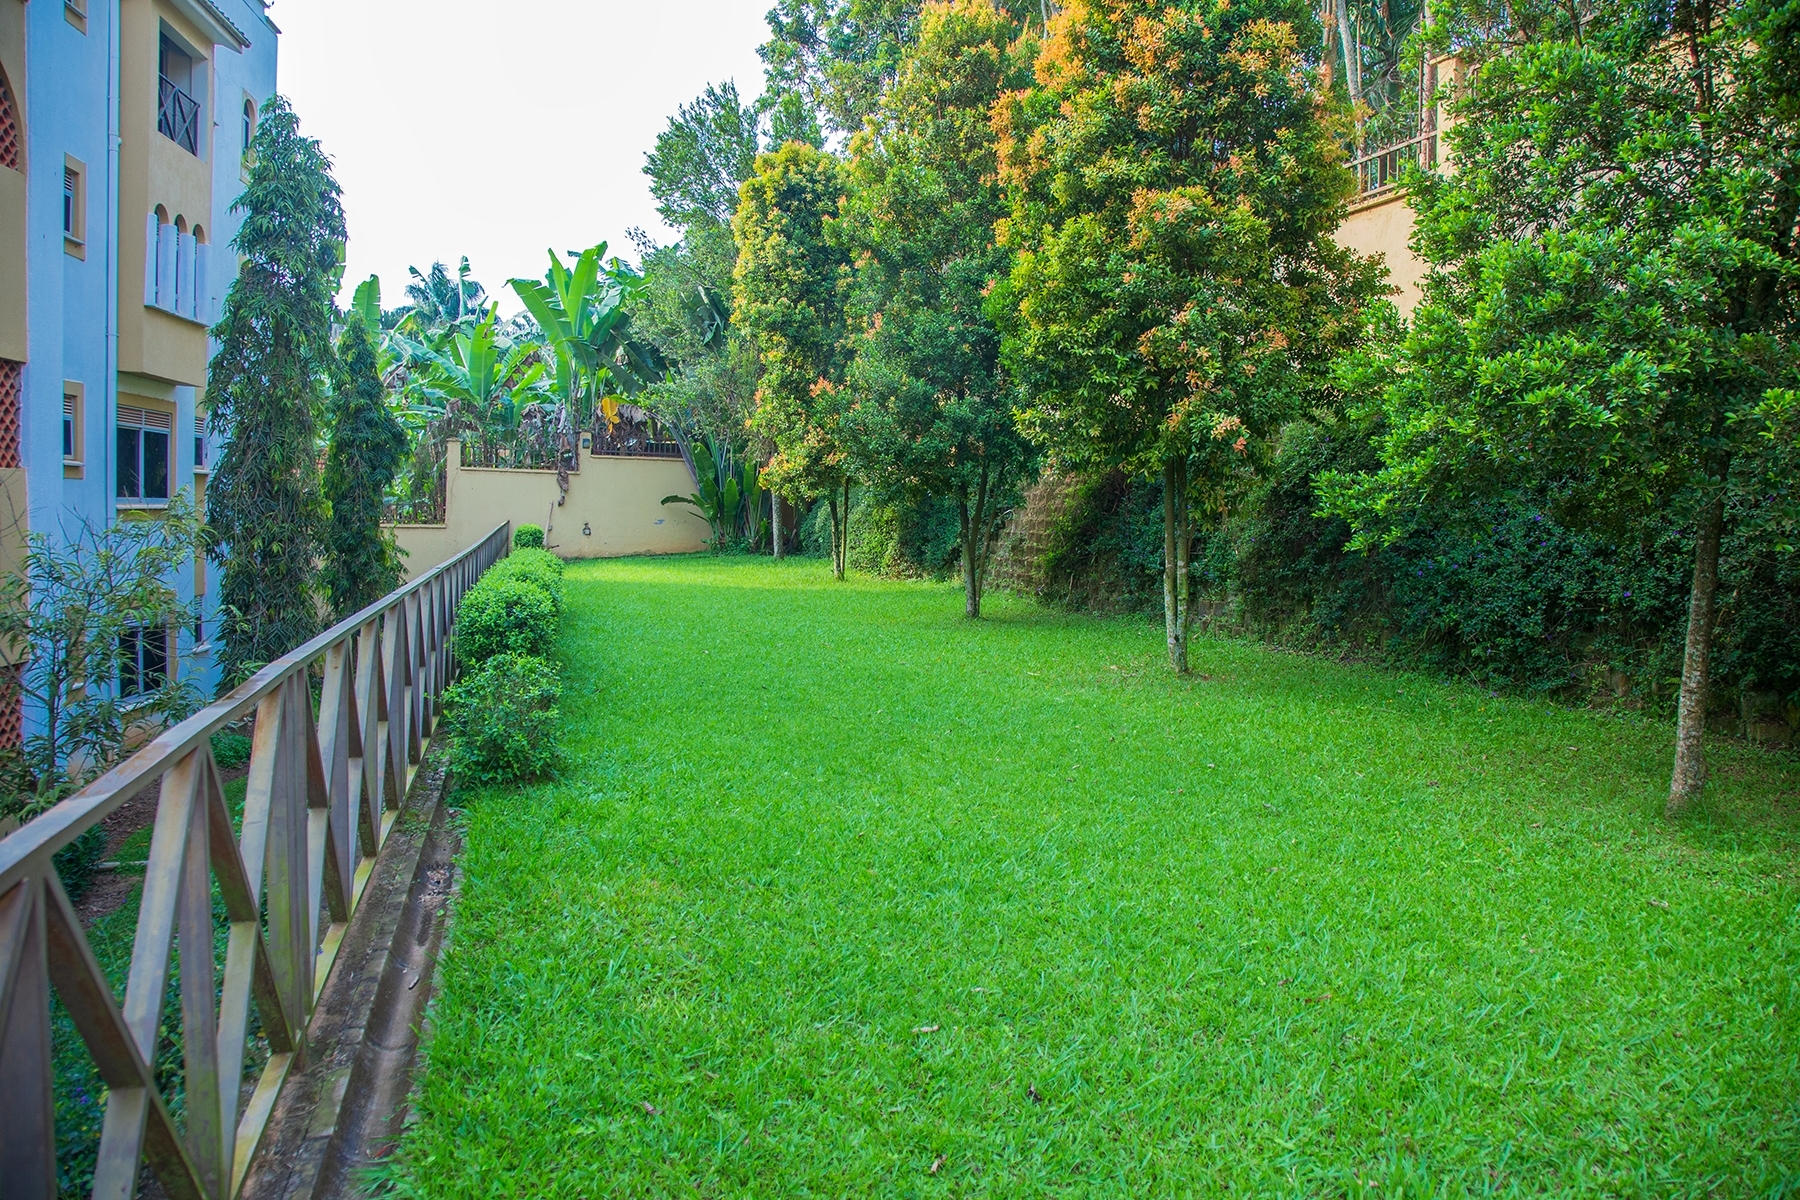 Apartment for sale in Portbell Kampala